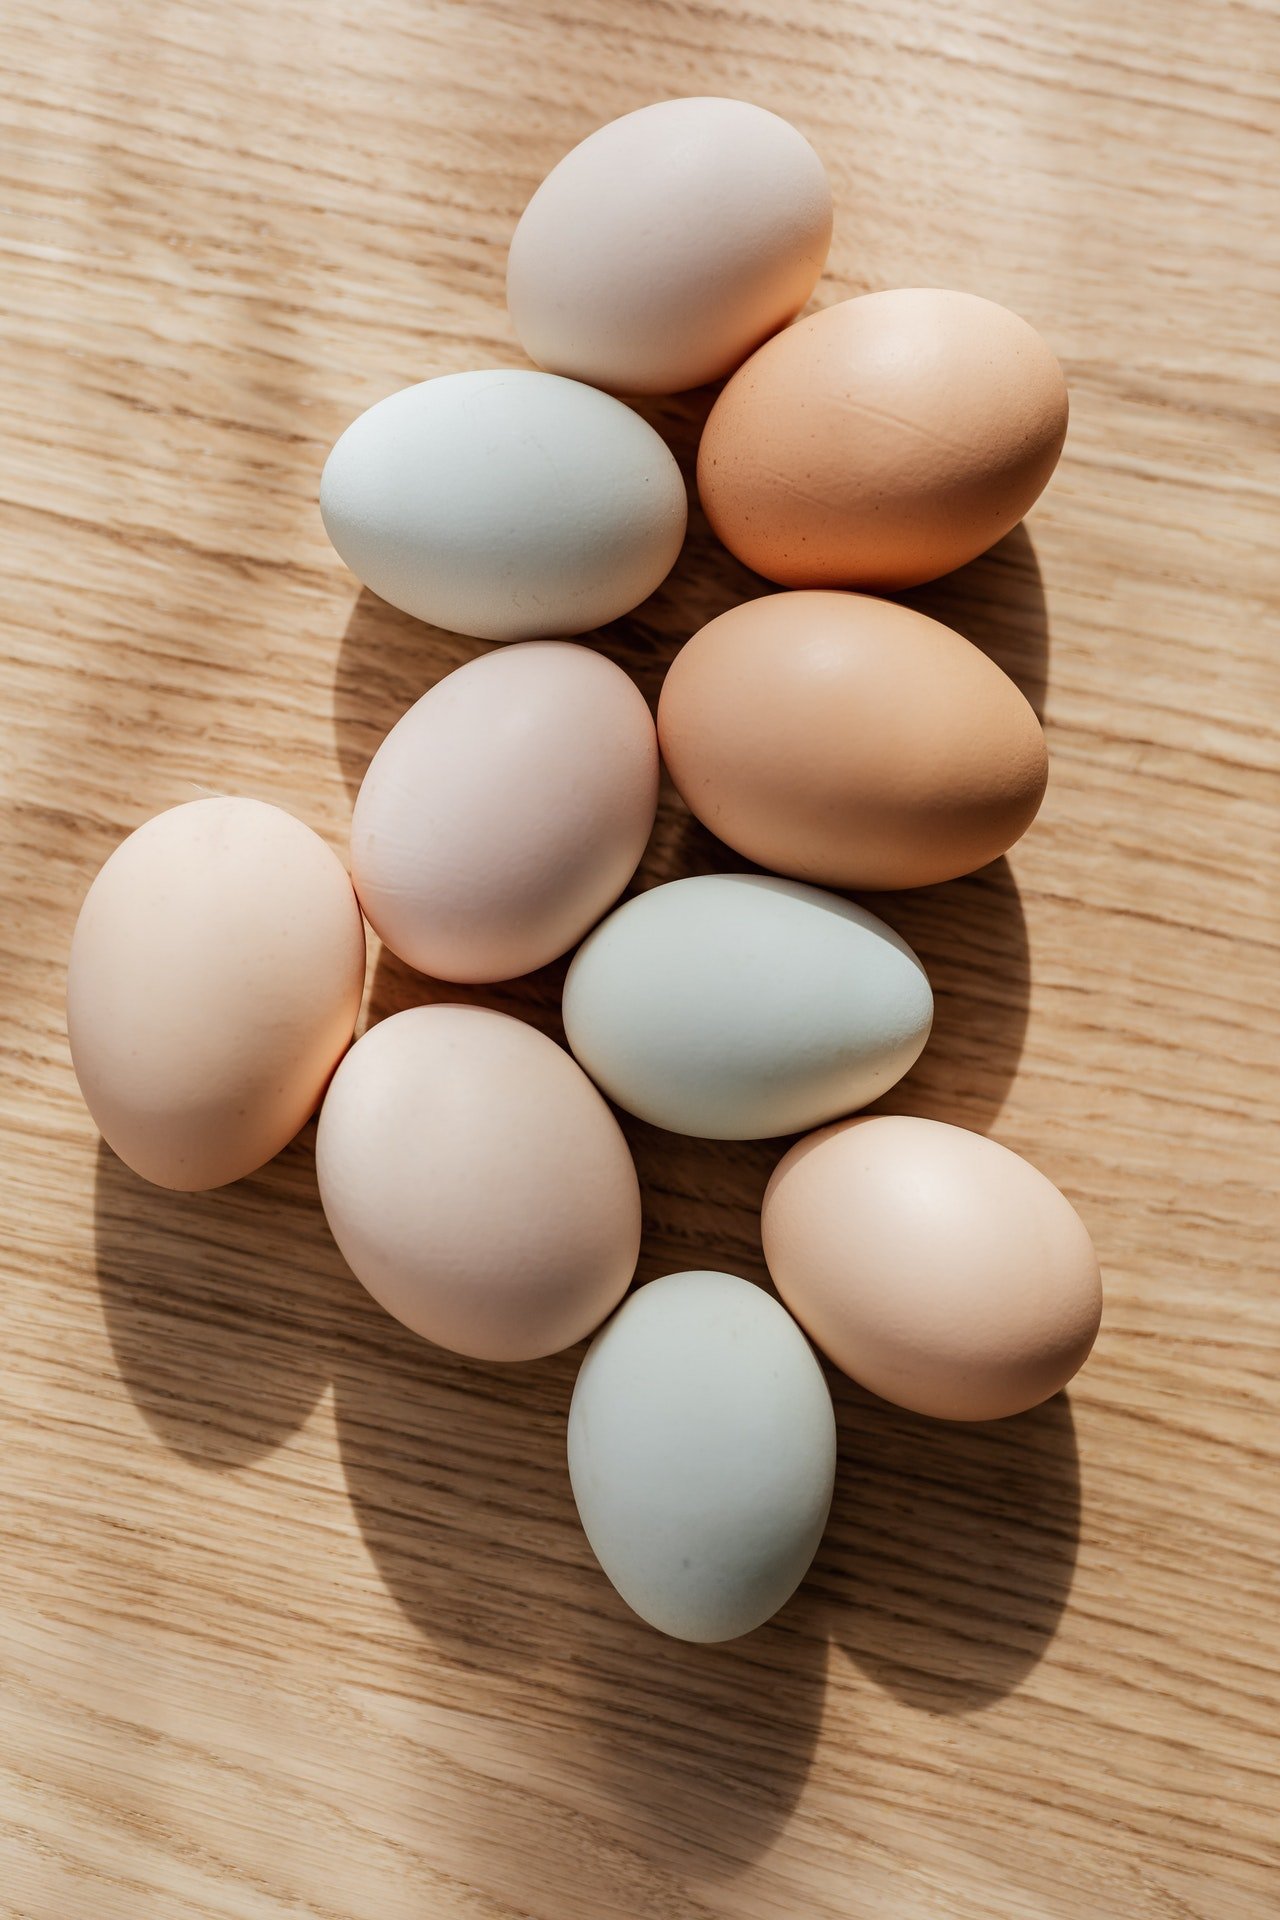 Photo of eggs on a table | Photo: Pexels